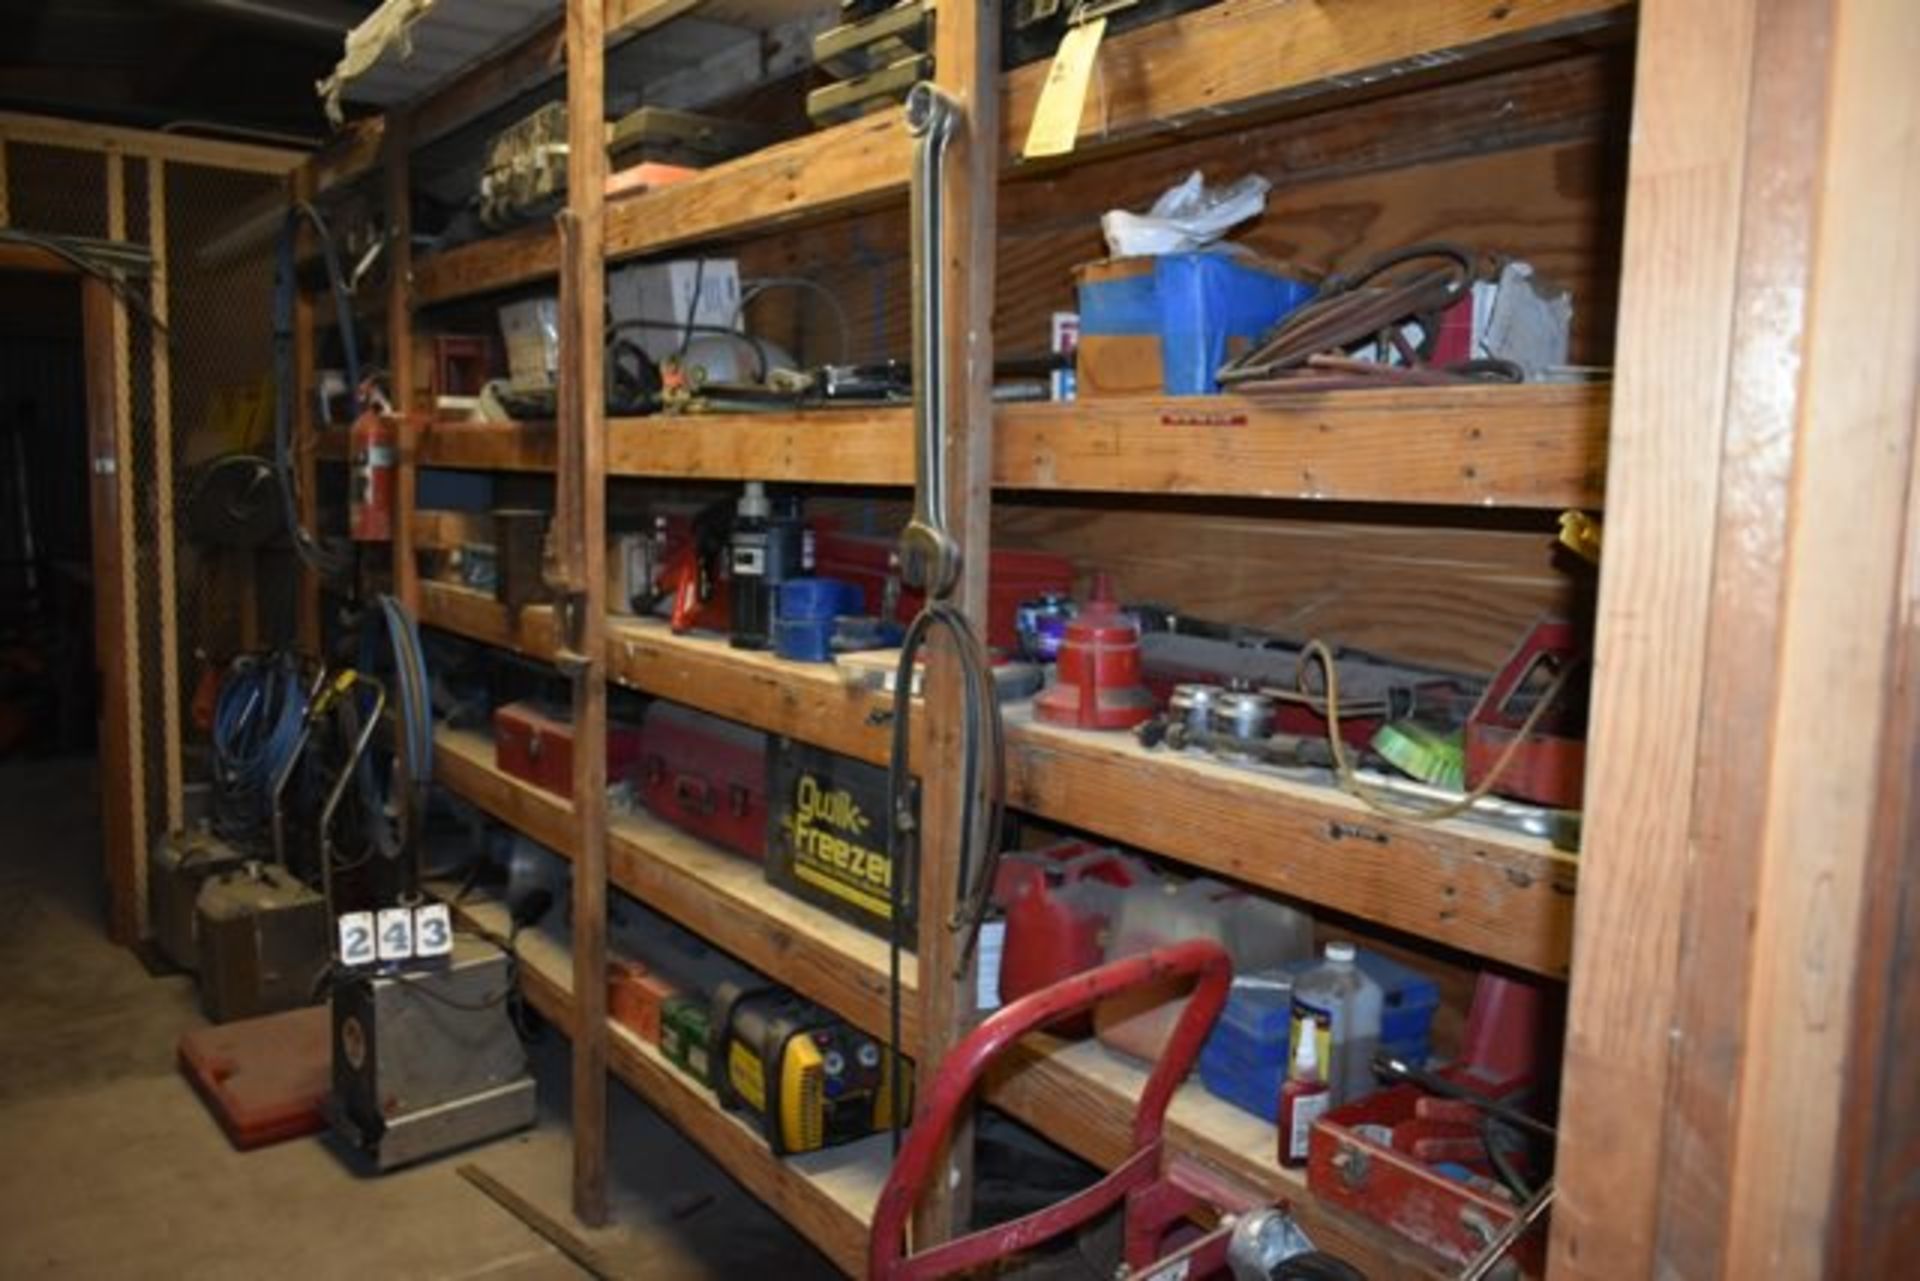 CONT OF 4 SHELVES: SOLDER GUNS, RED HEAD A-10, SHIM SETS, PULLEYS, GOODWAY REAM-A-MATIC, MISC